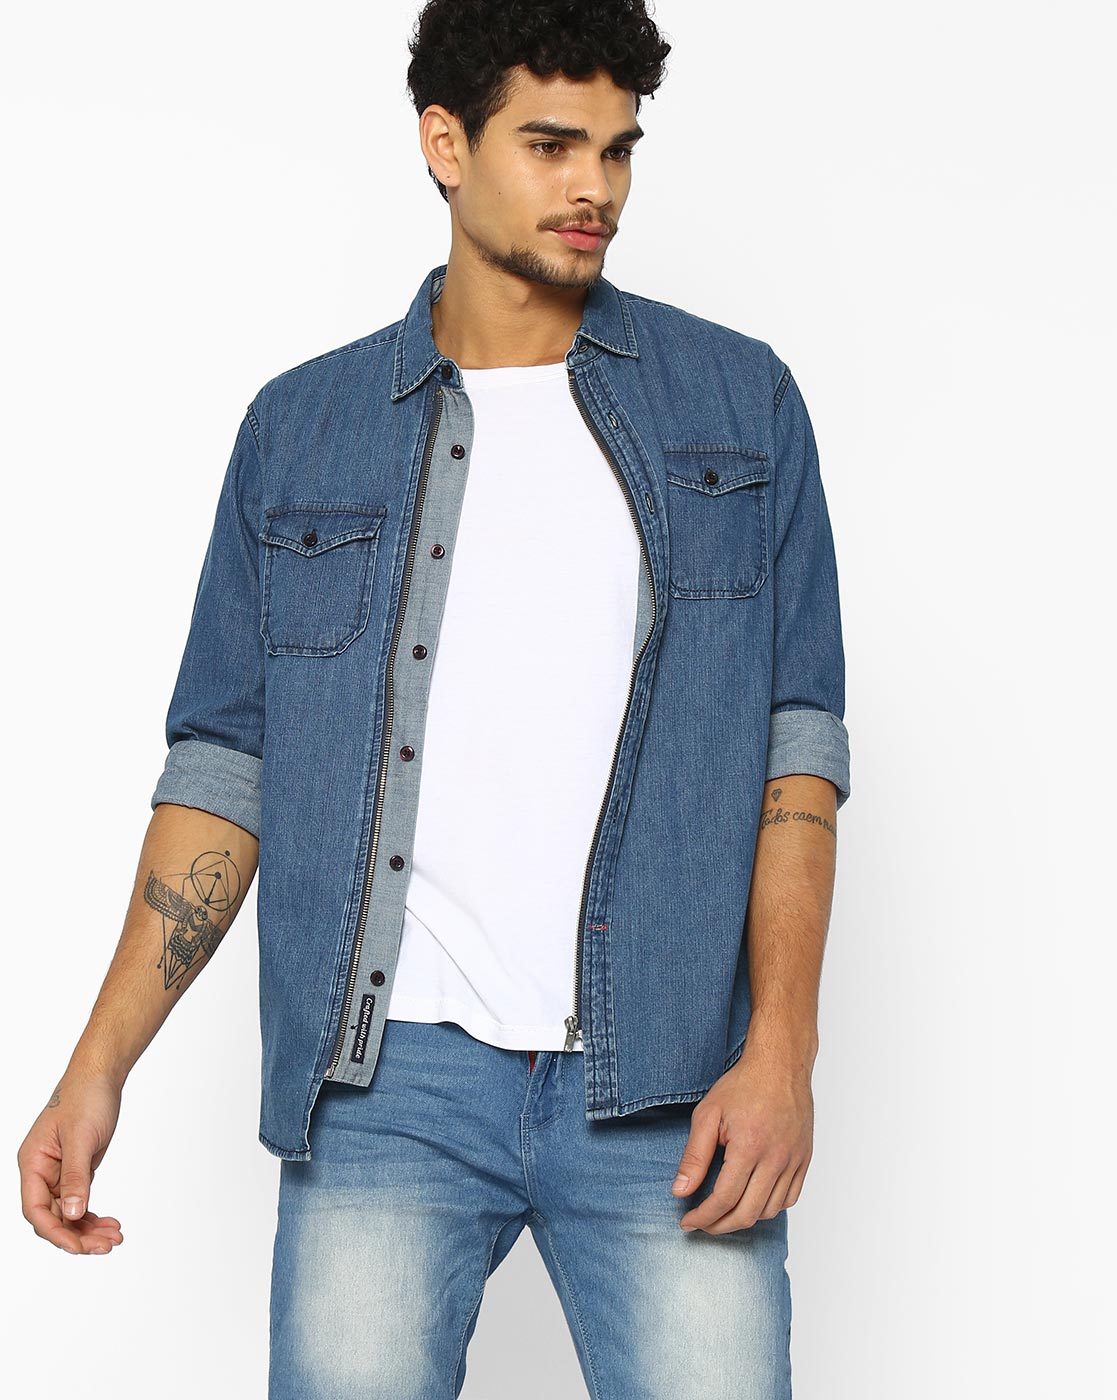 Diesel Denim: fabrics, styles and washes